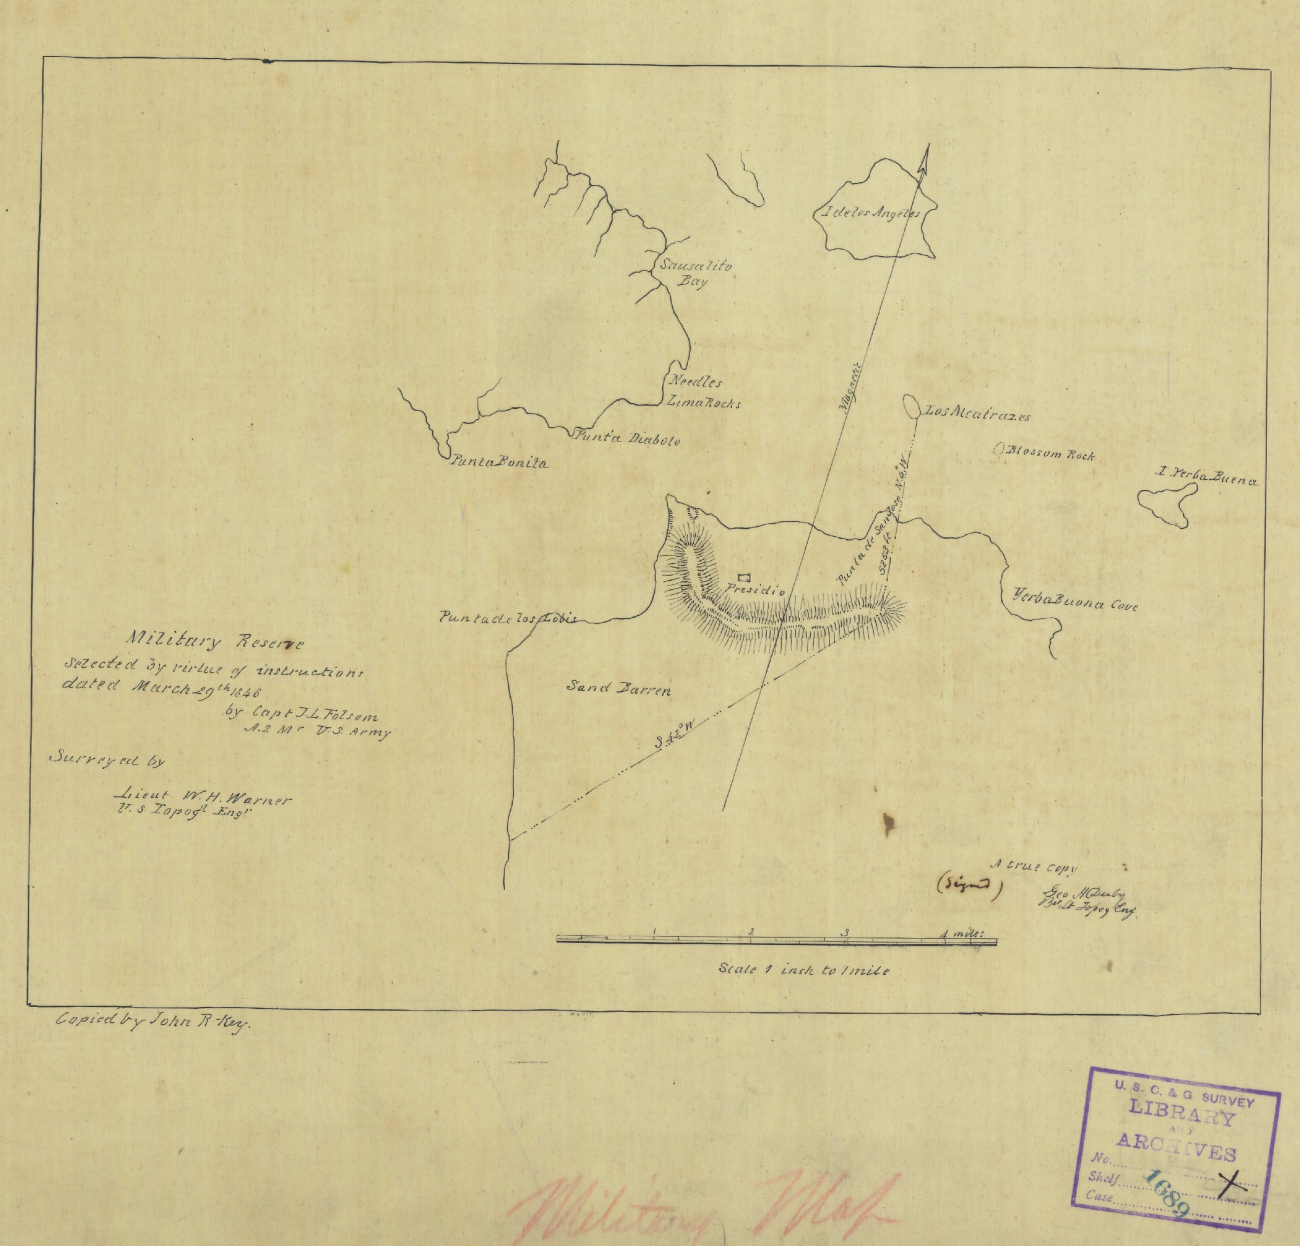 Copy of sketch map by Captain J